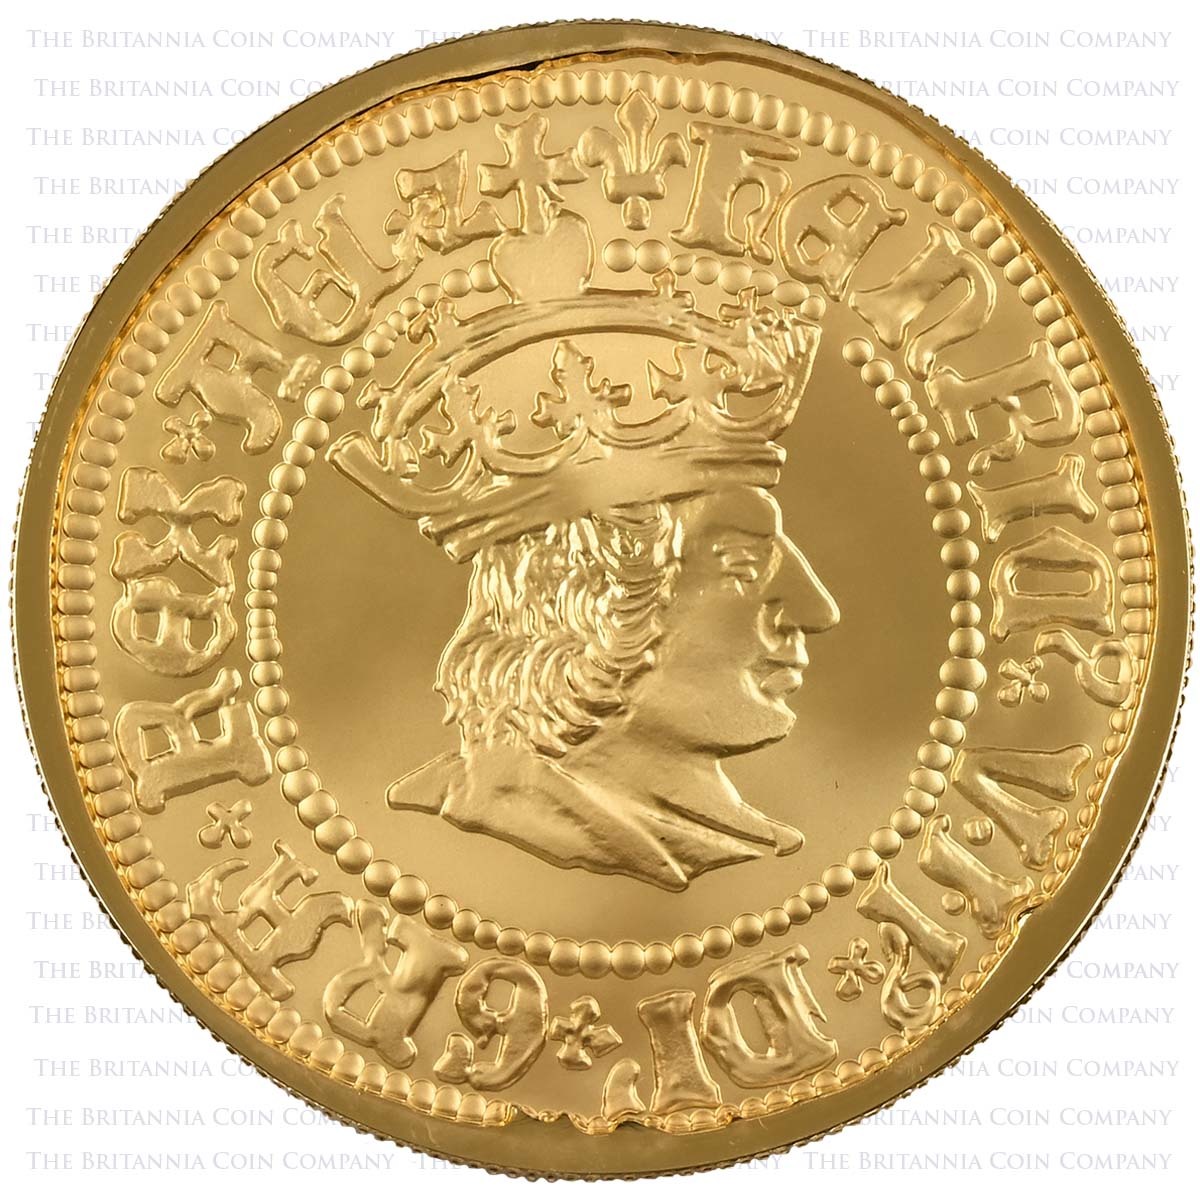 UK22H7G20 2022 British Monarchs Henry VII 2 Ounce Gold Proof Reverse